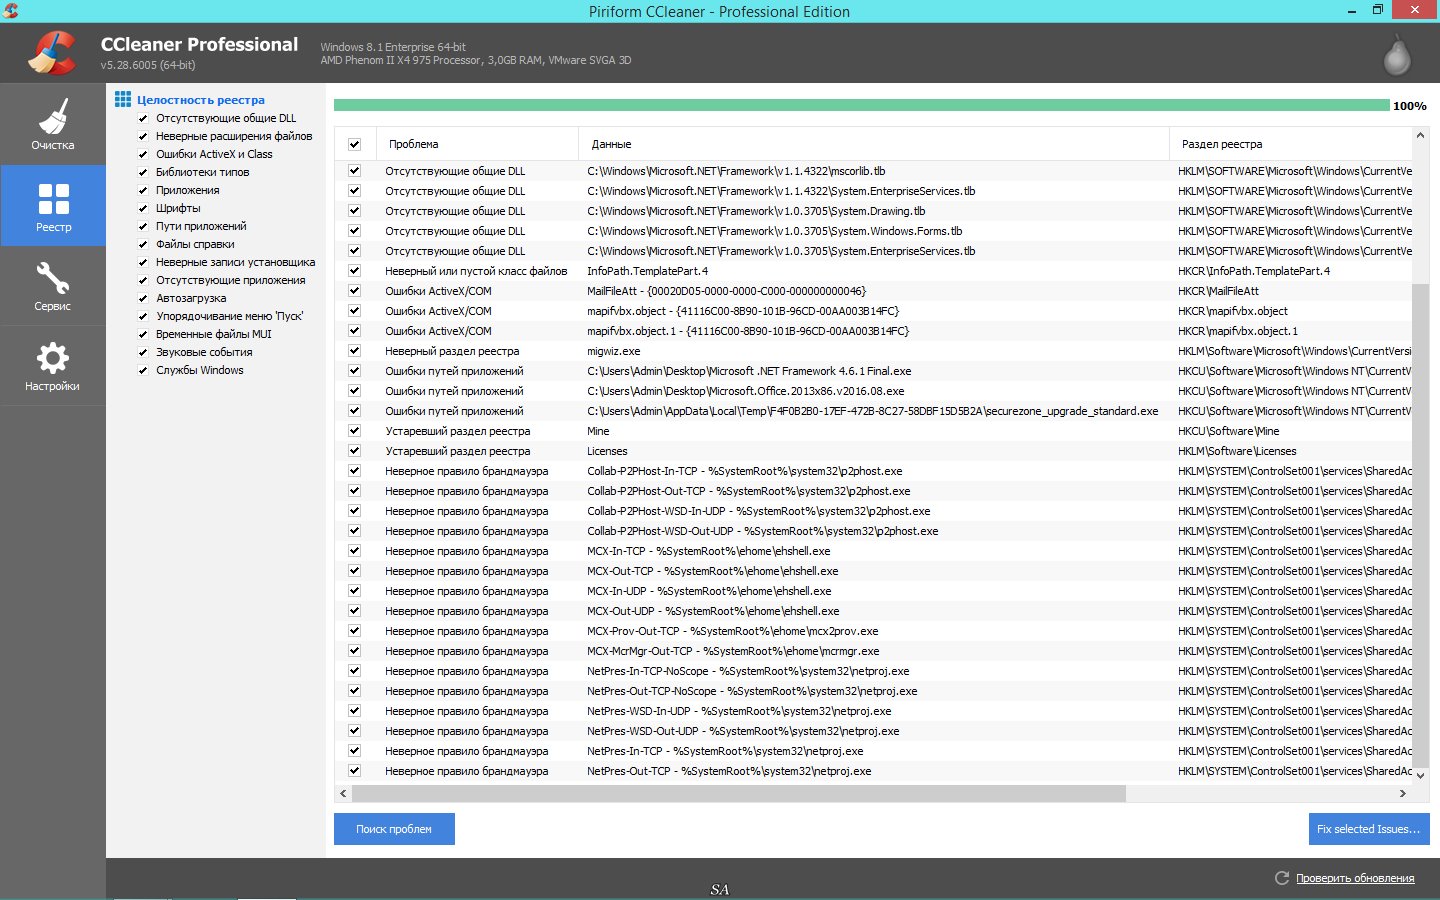 Ccleaner репак. CCLEANER REPACK by KPOJIUK 2017. CCLEANER Technician Edition. CCLEANER 5.19. HKLM\System\controlset001\services\procmon24.